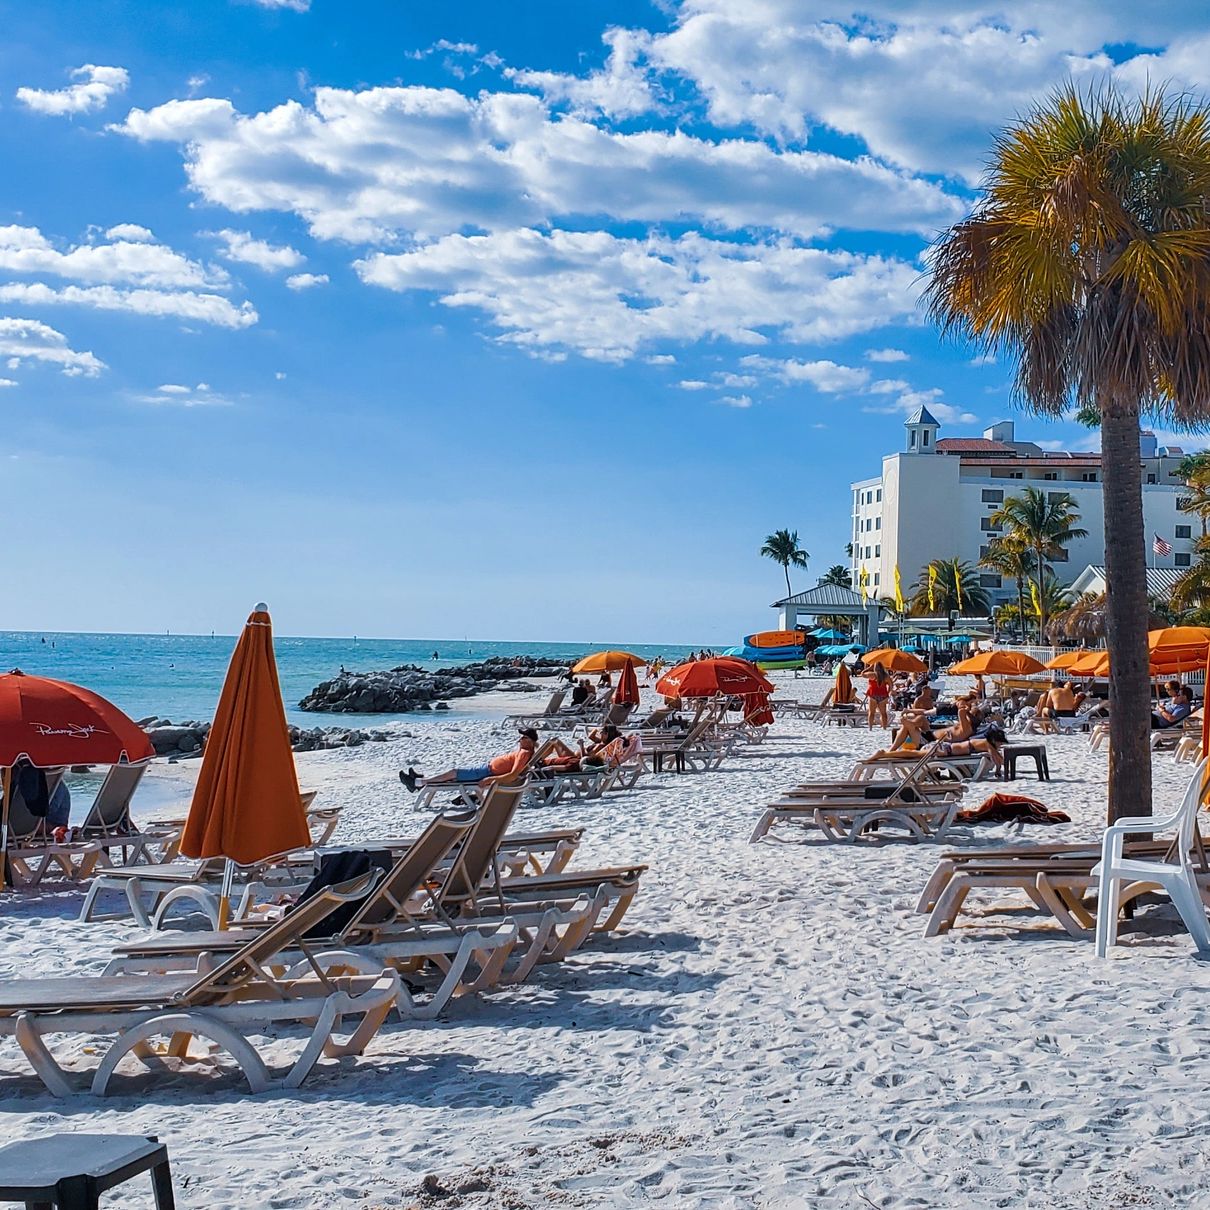 clearwater beach in florida with beach chairs, orange umbrellas and palm trees 